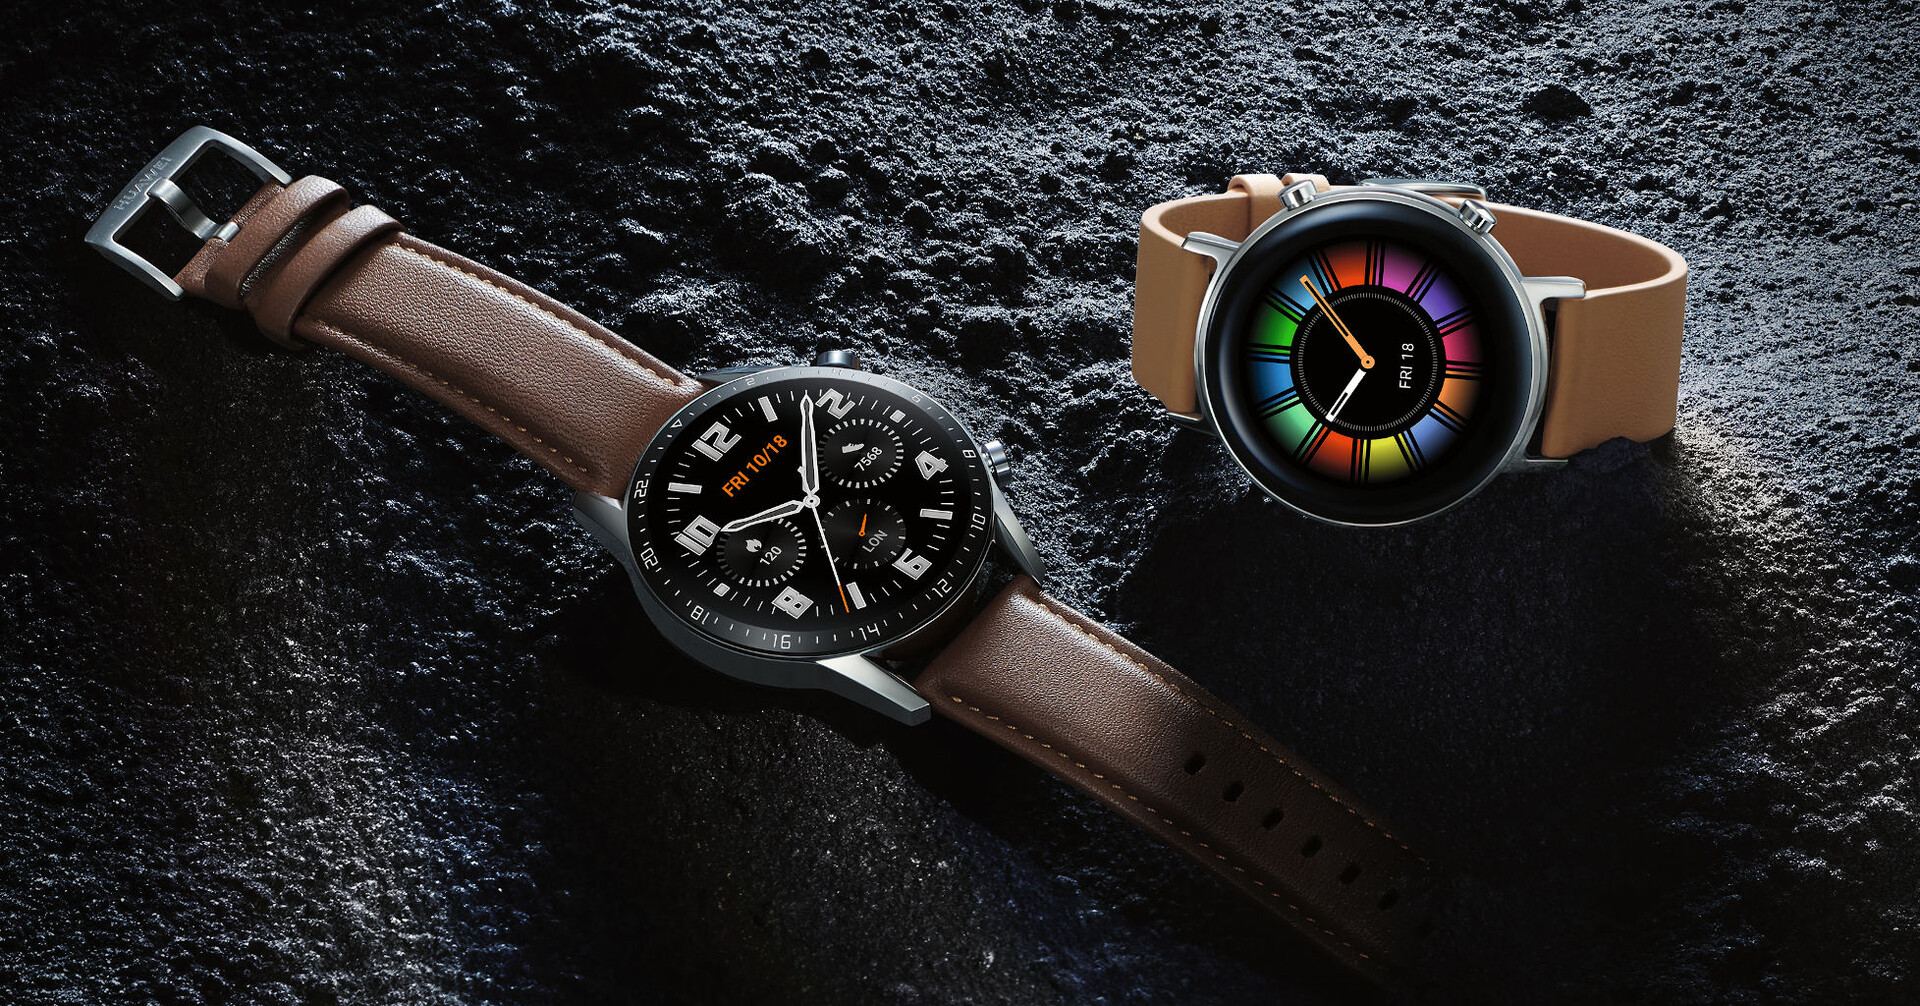 Huawei Watch GT 2 Smartwatch Review: Stupendously smart, but buggy